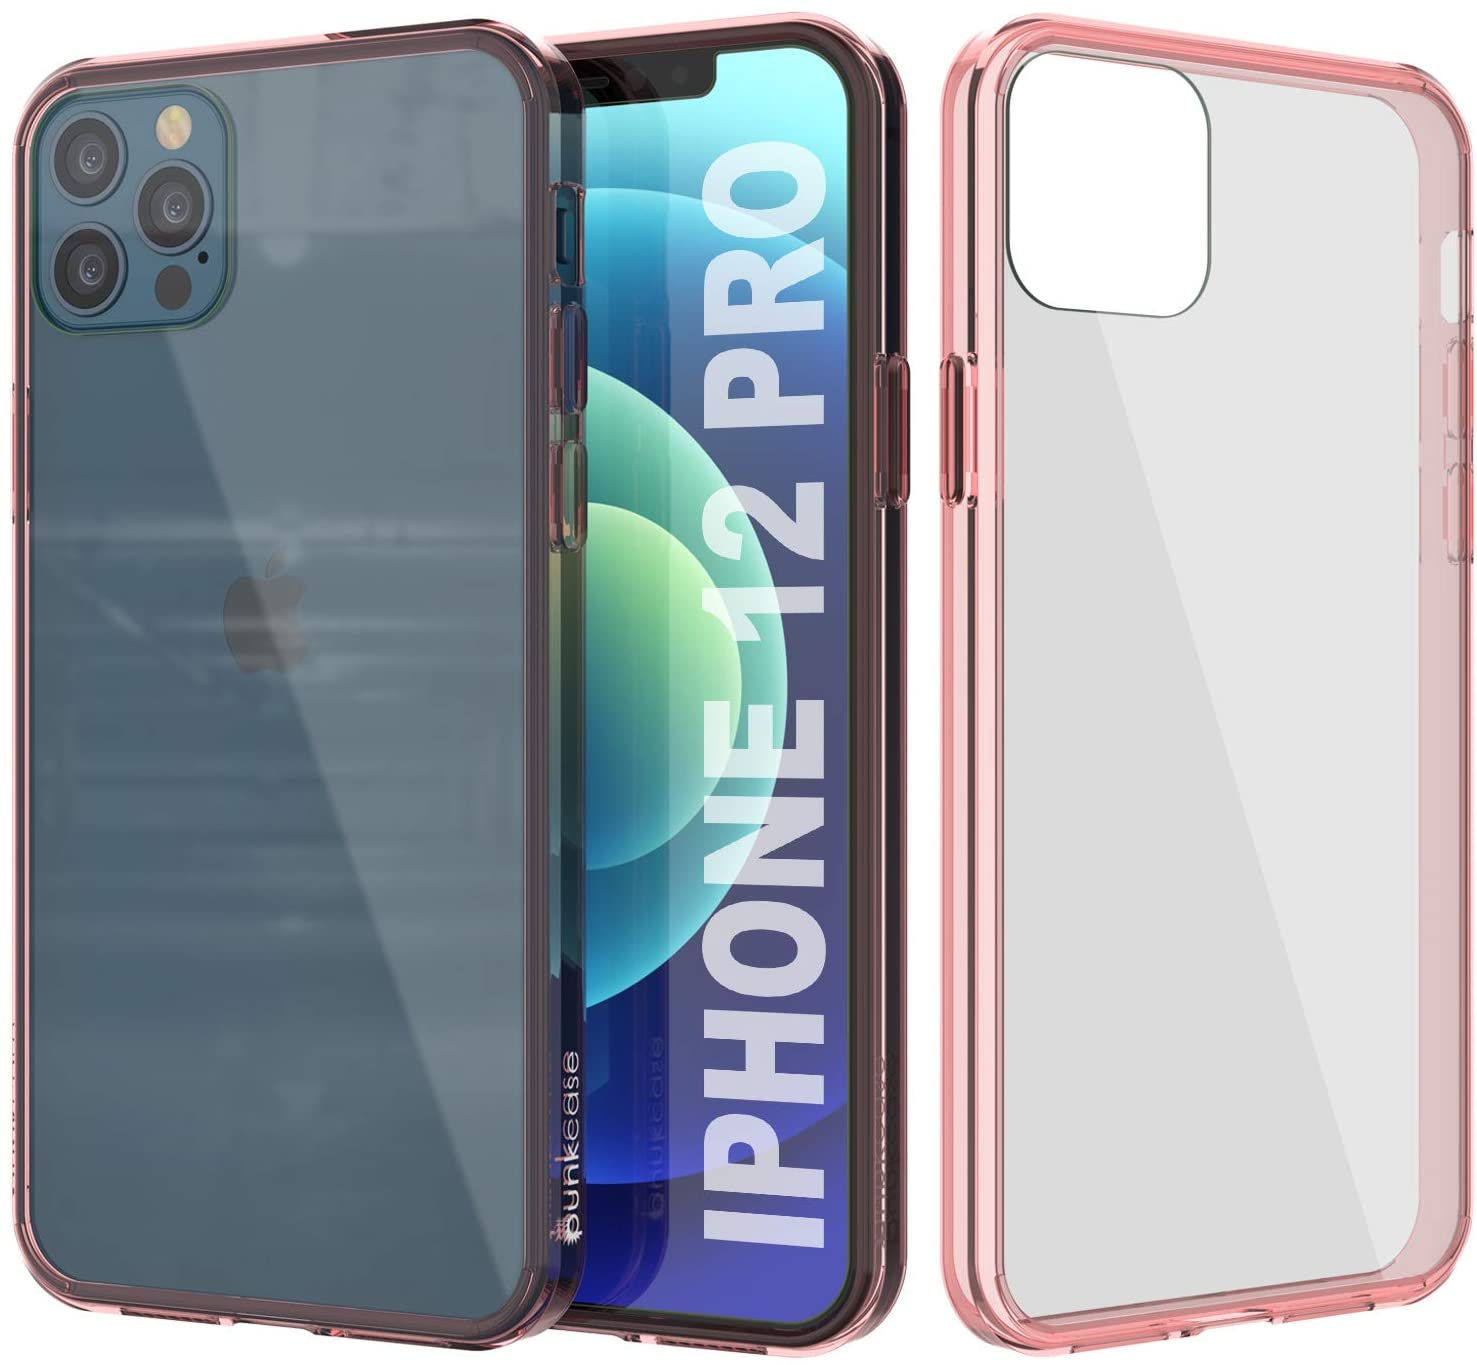 iPhone 12 Pro Case Punkcase® LUCID 2.0 Crystal Pink Series w/ SHIELD Screen Protector | Ultra Fit